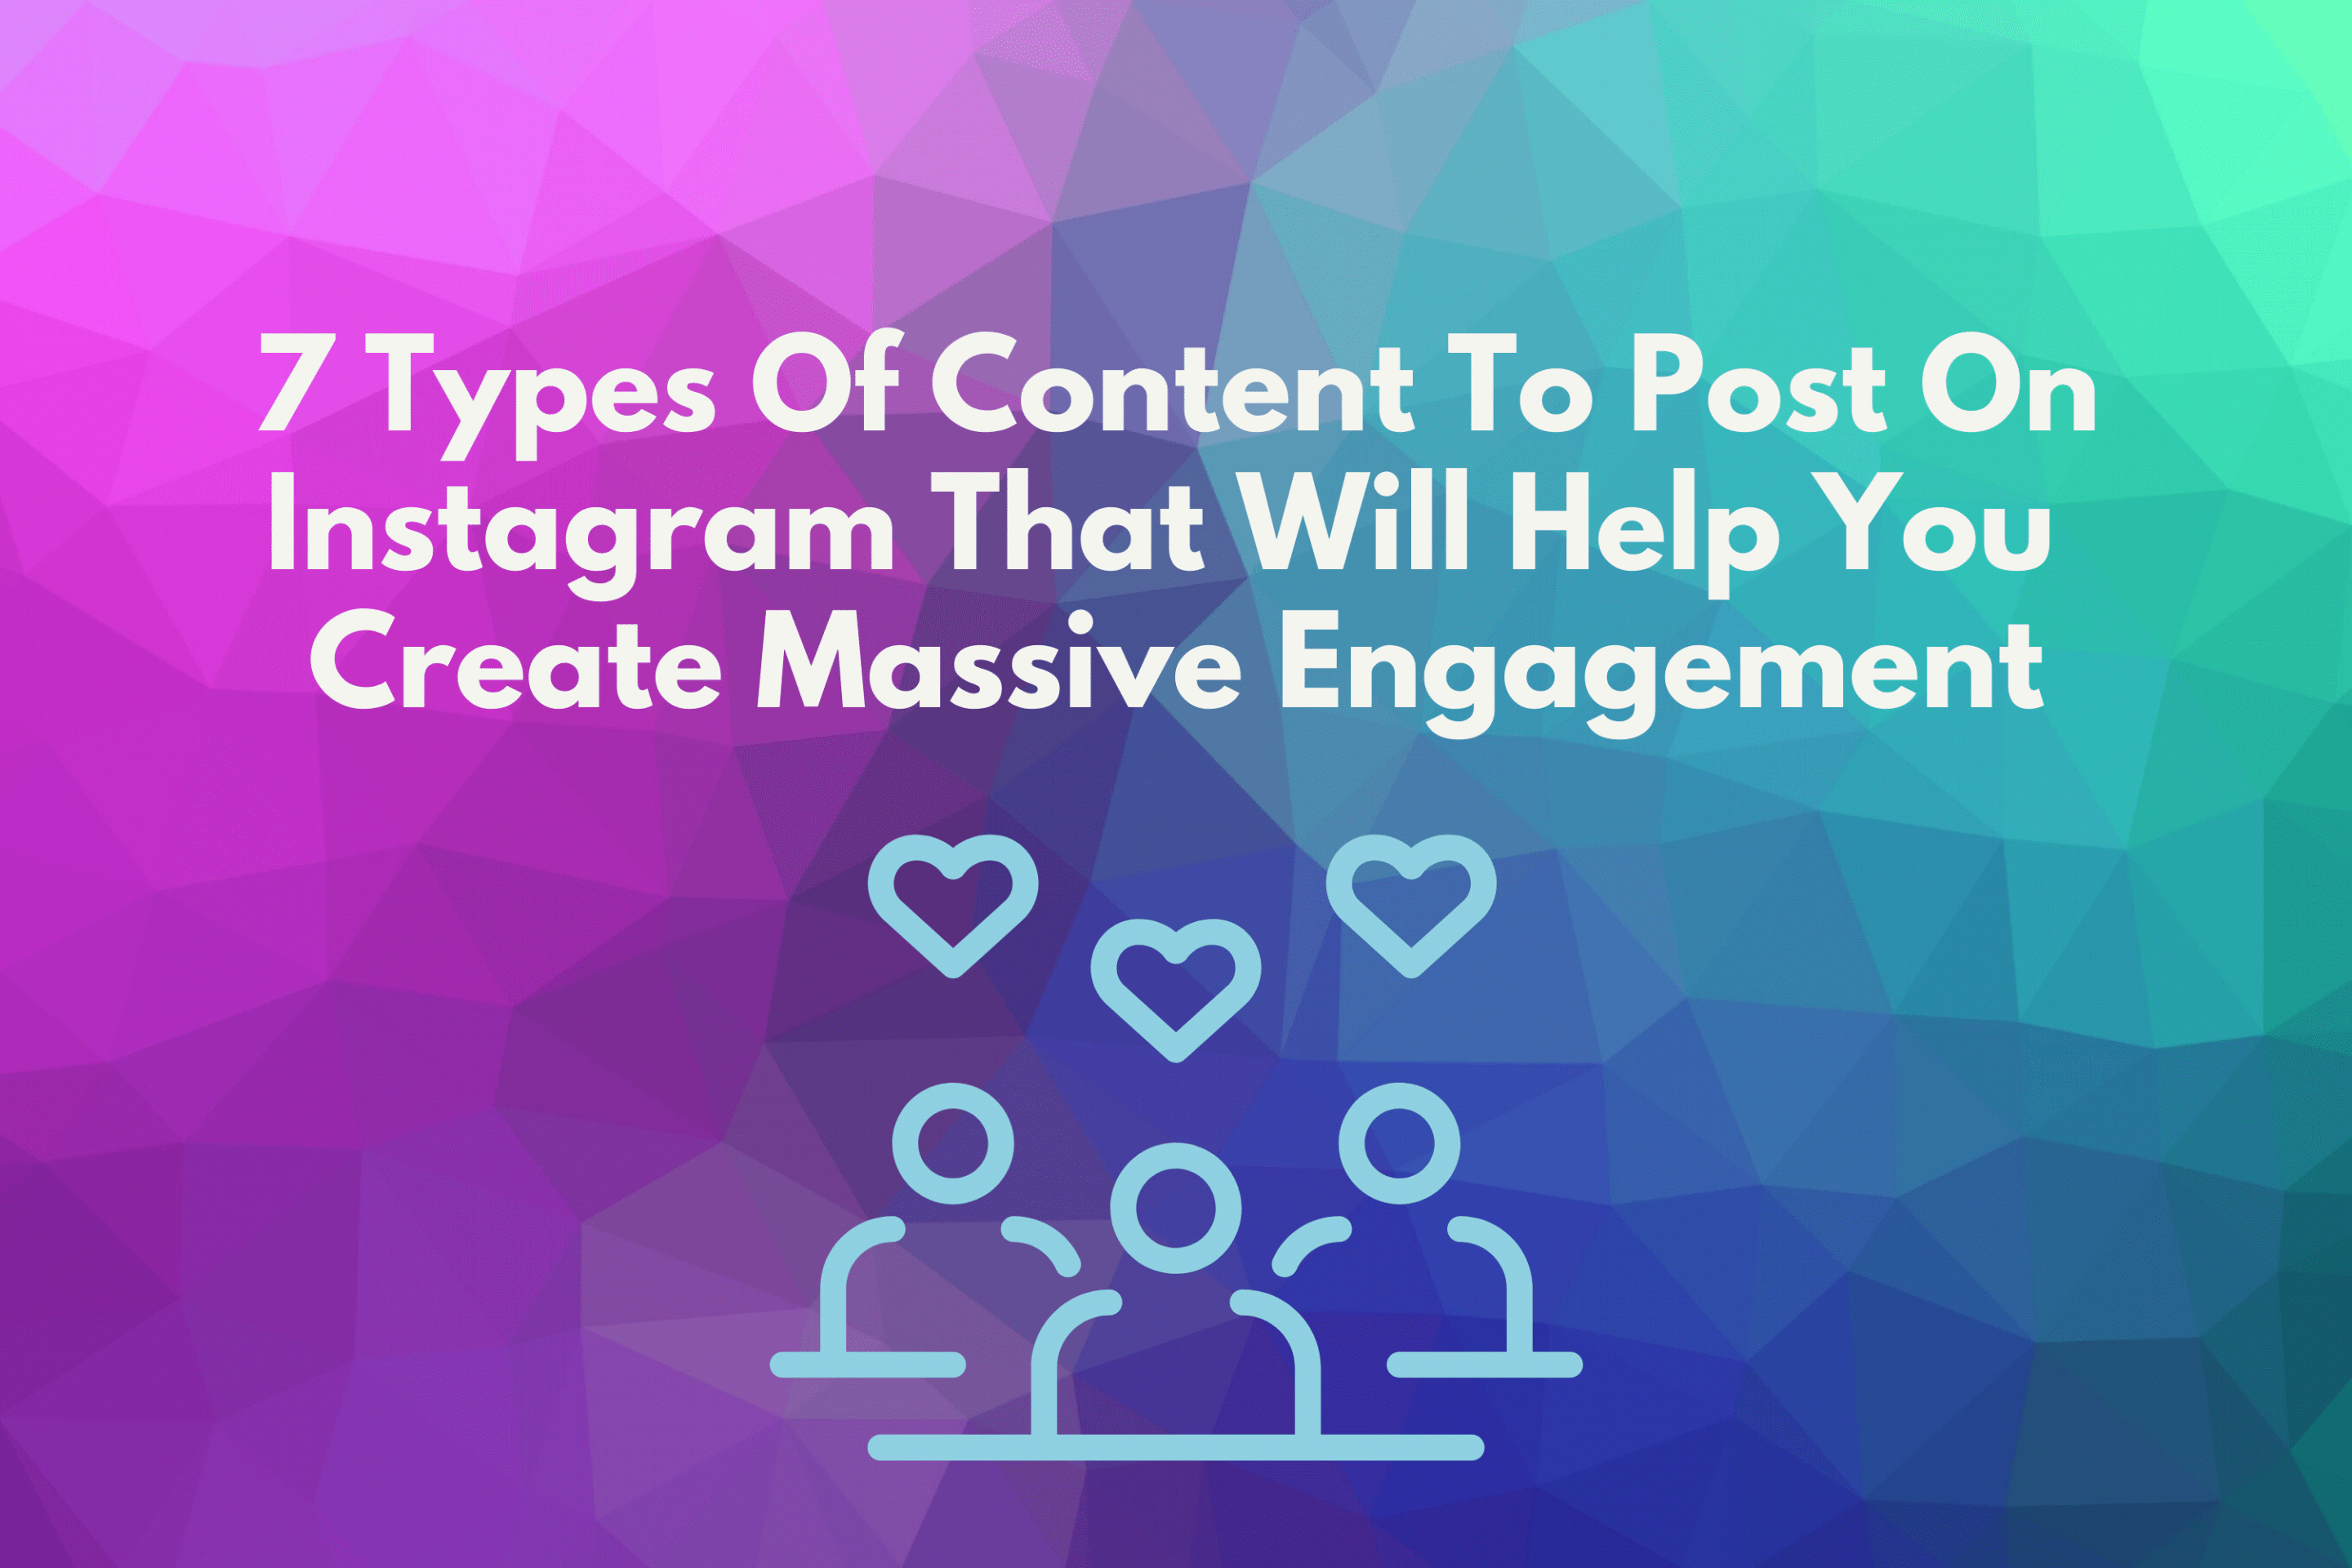 7 Types Of Content To Post On Instagram That Will Help You Create Massive Engagement